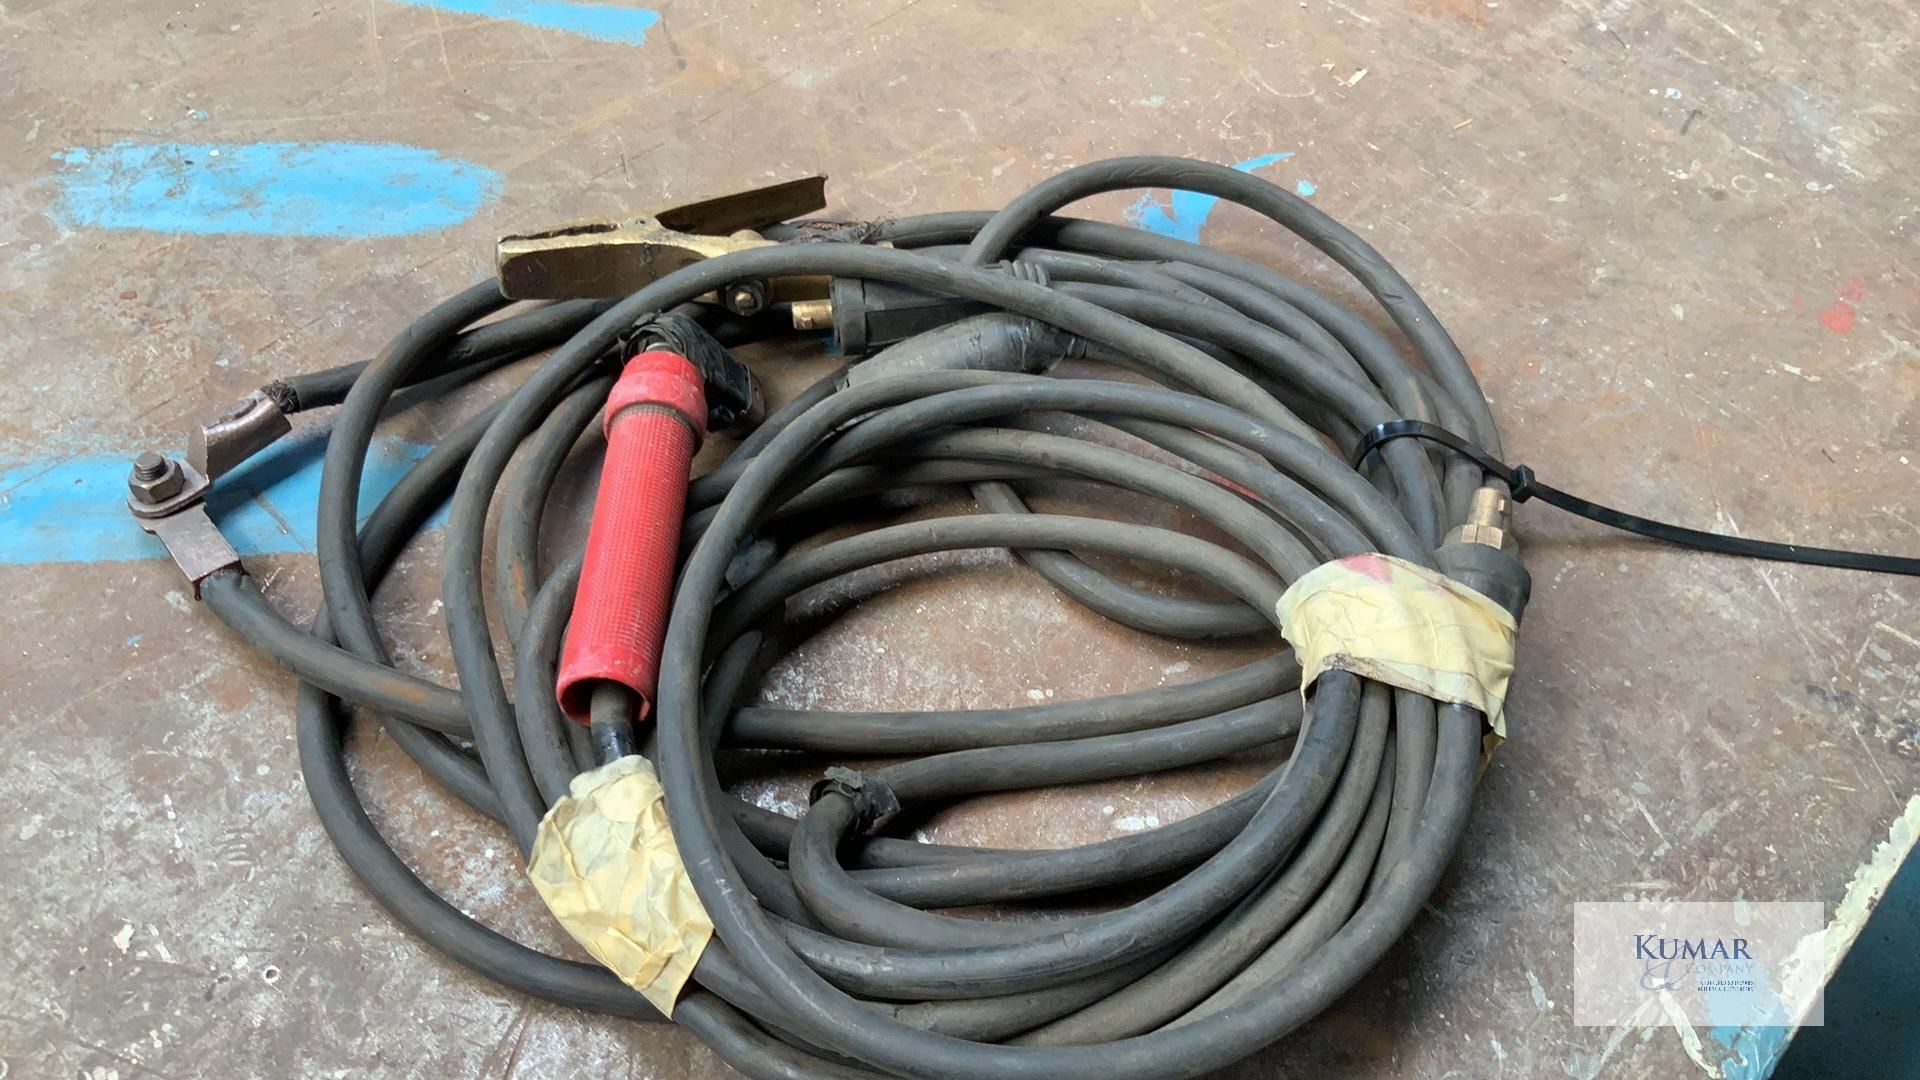 Make Unknown Welding Torch with Earth Cable/Clamp